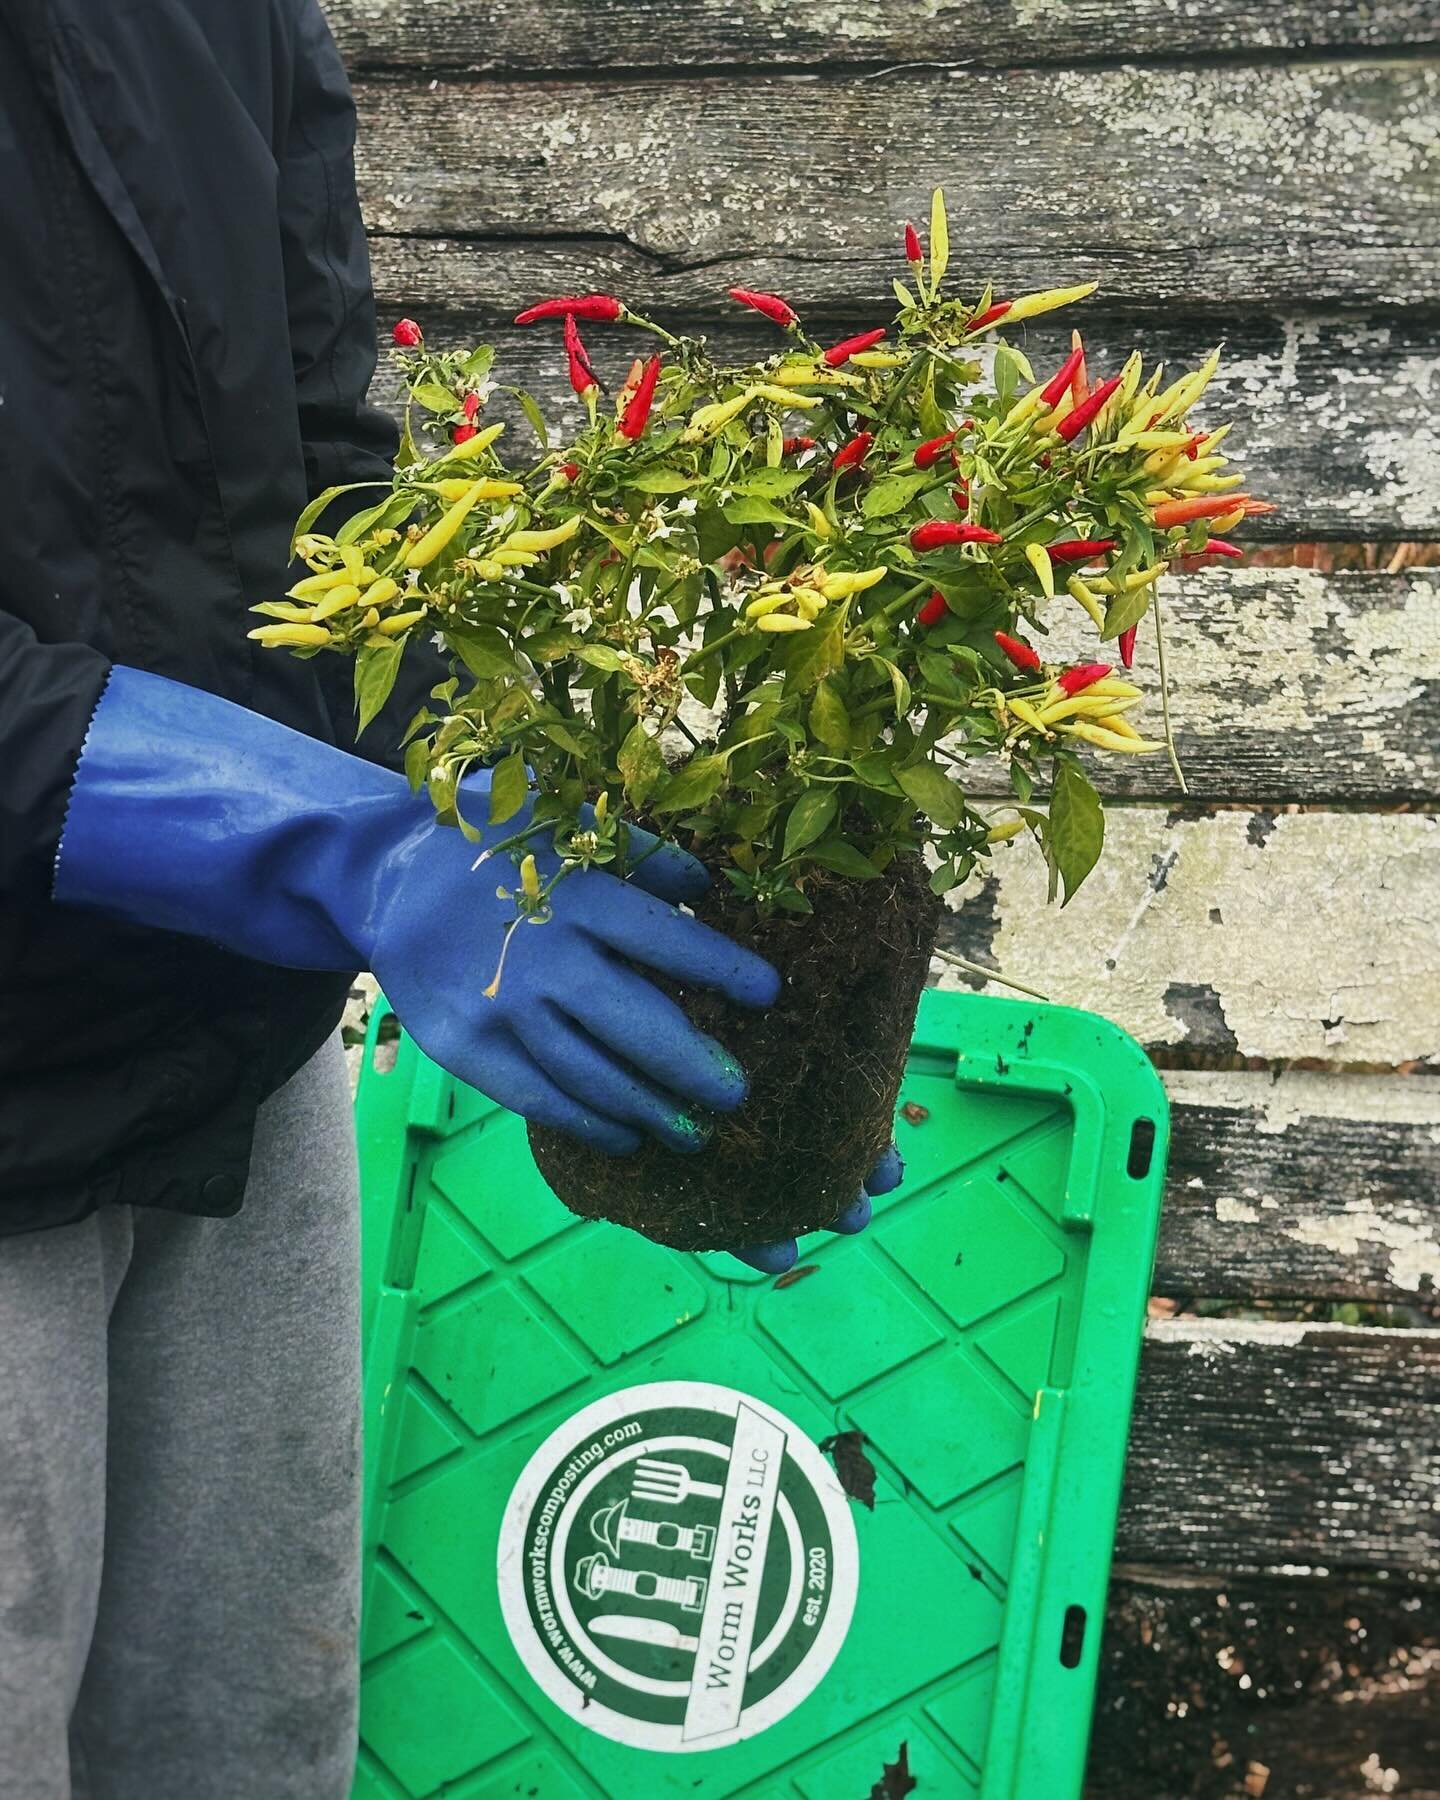 Proof that Worm Works composters bring the heat. Chili peppers, anyone?

We&rsquo;re always sorry to see a plant go, but composting ensures its life cycle will continue by feeding our local soils.🤎🪴&nbsp;

Our community of composters is helping to 